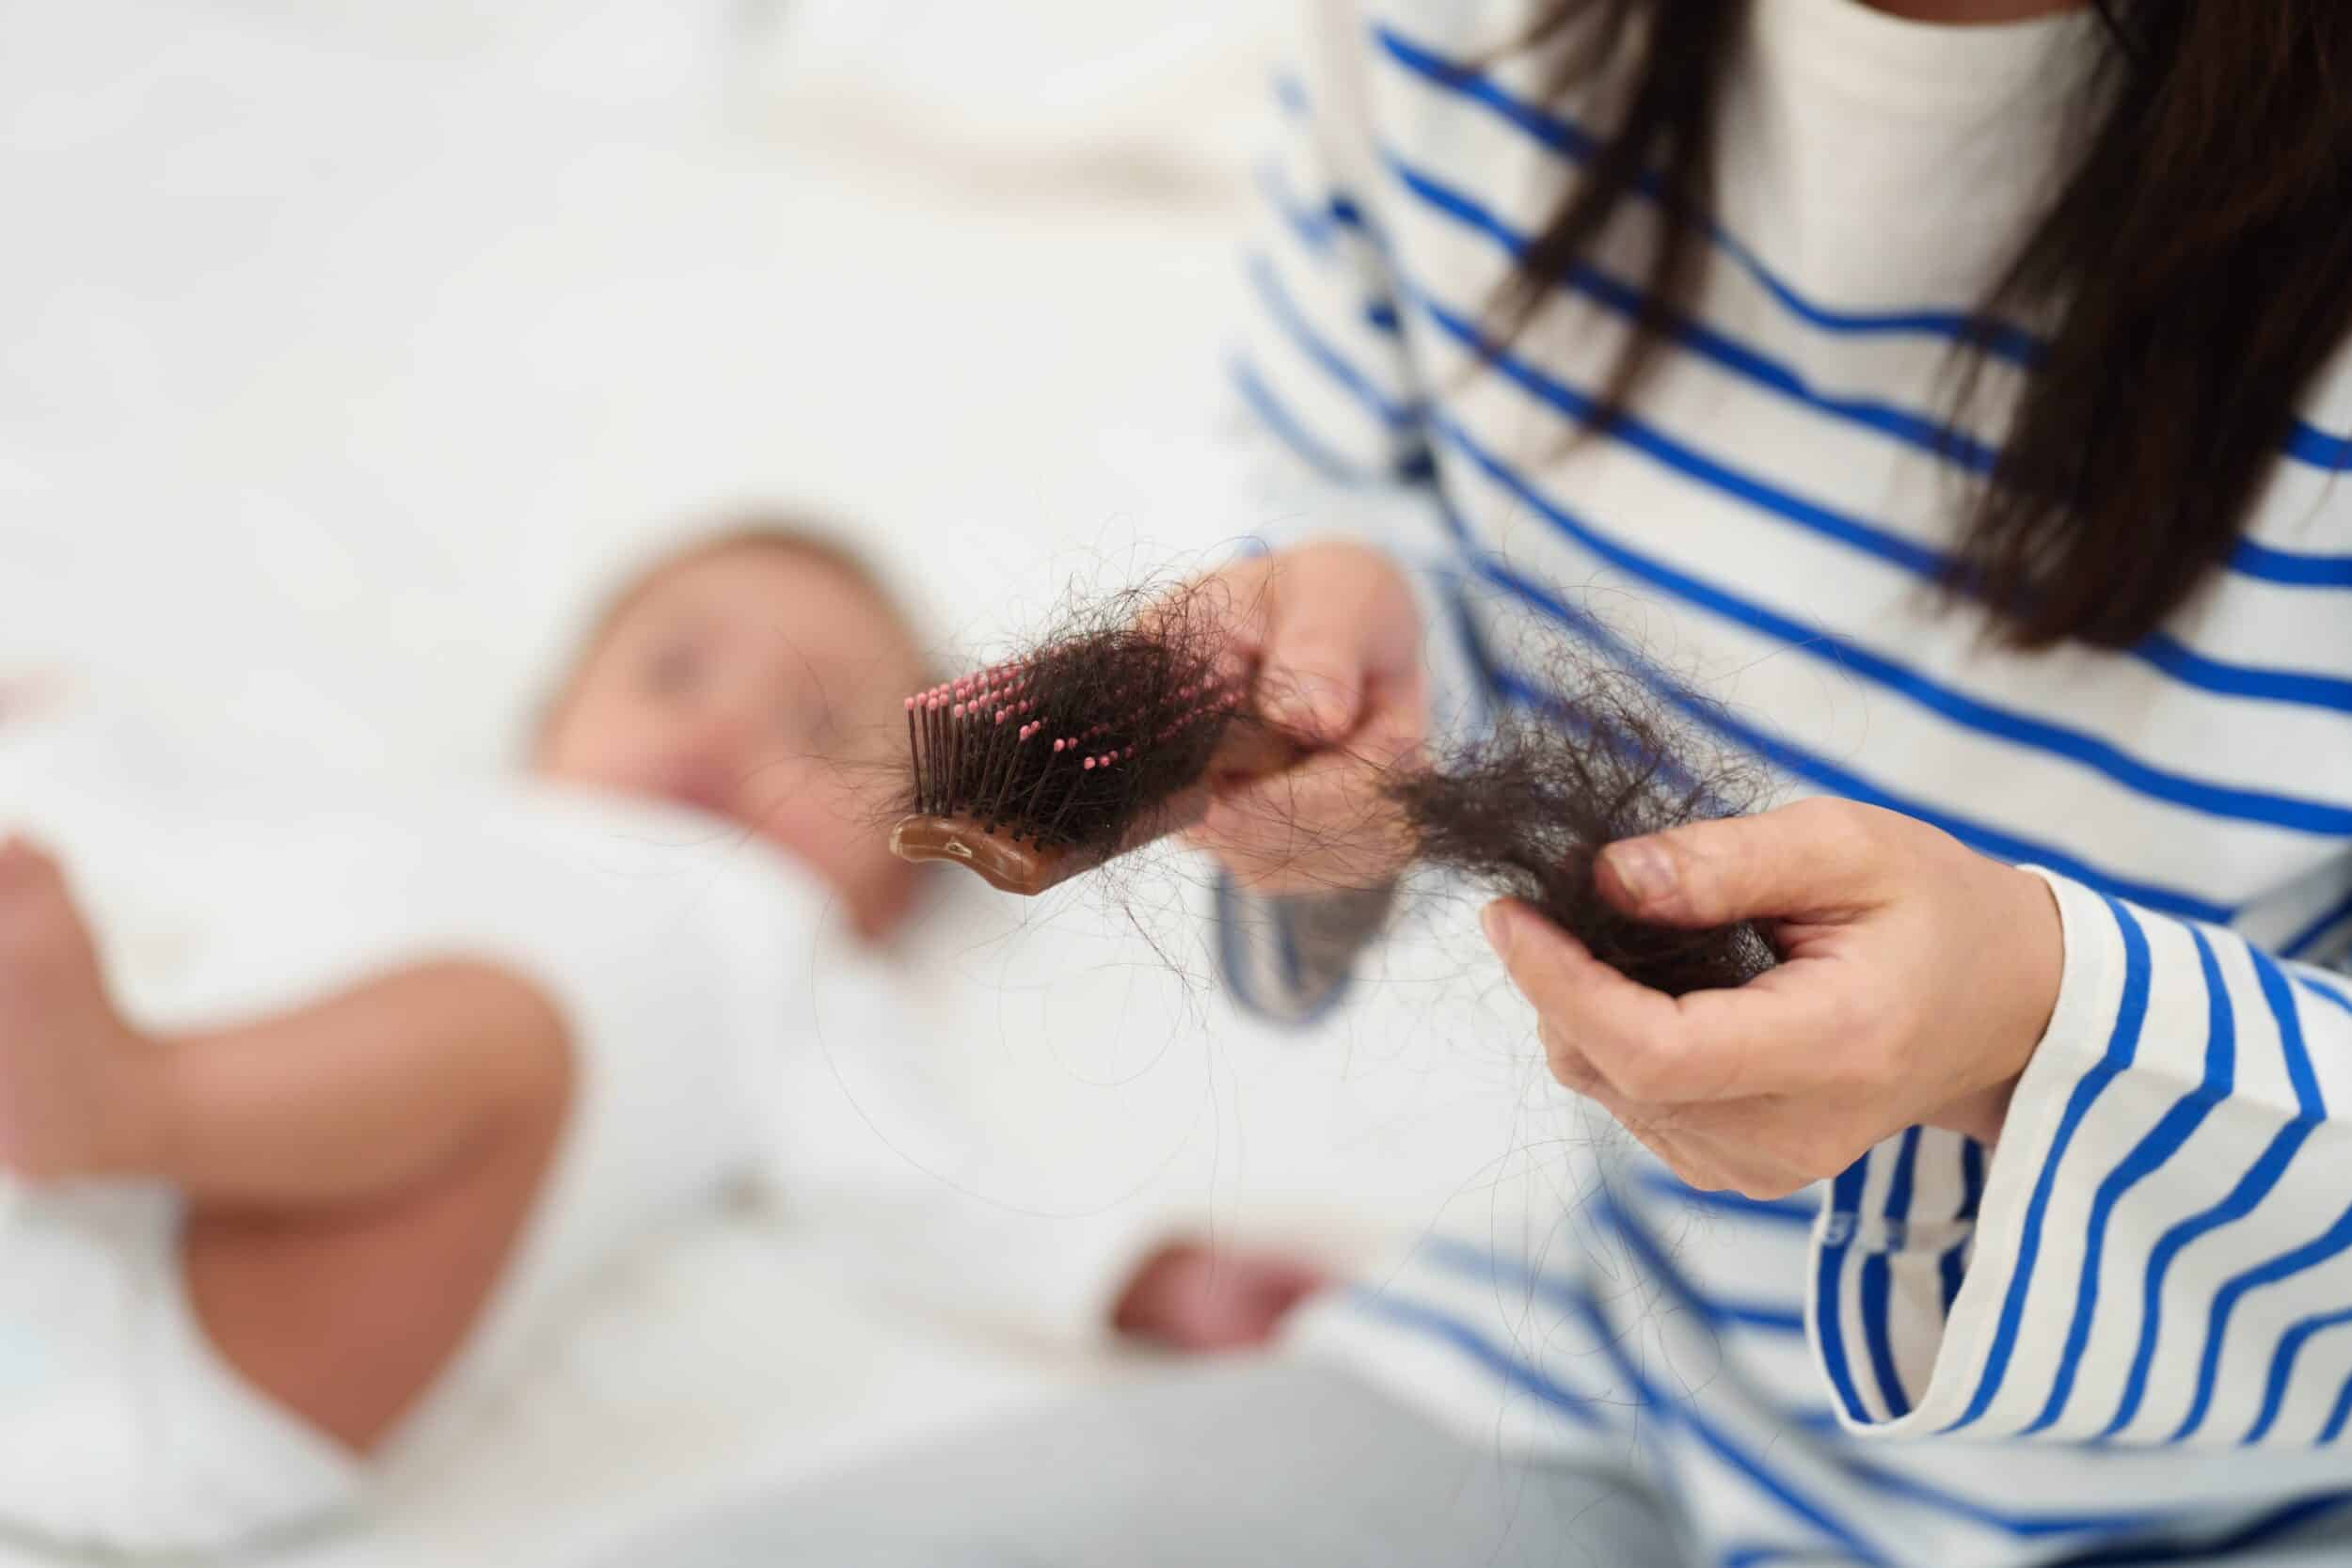 Woman sitting next to her newborn baby finds hair in her brush, a sign of postpartum hair loss.